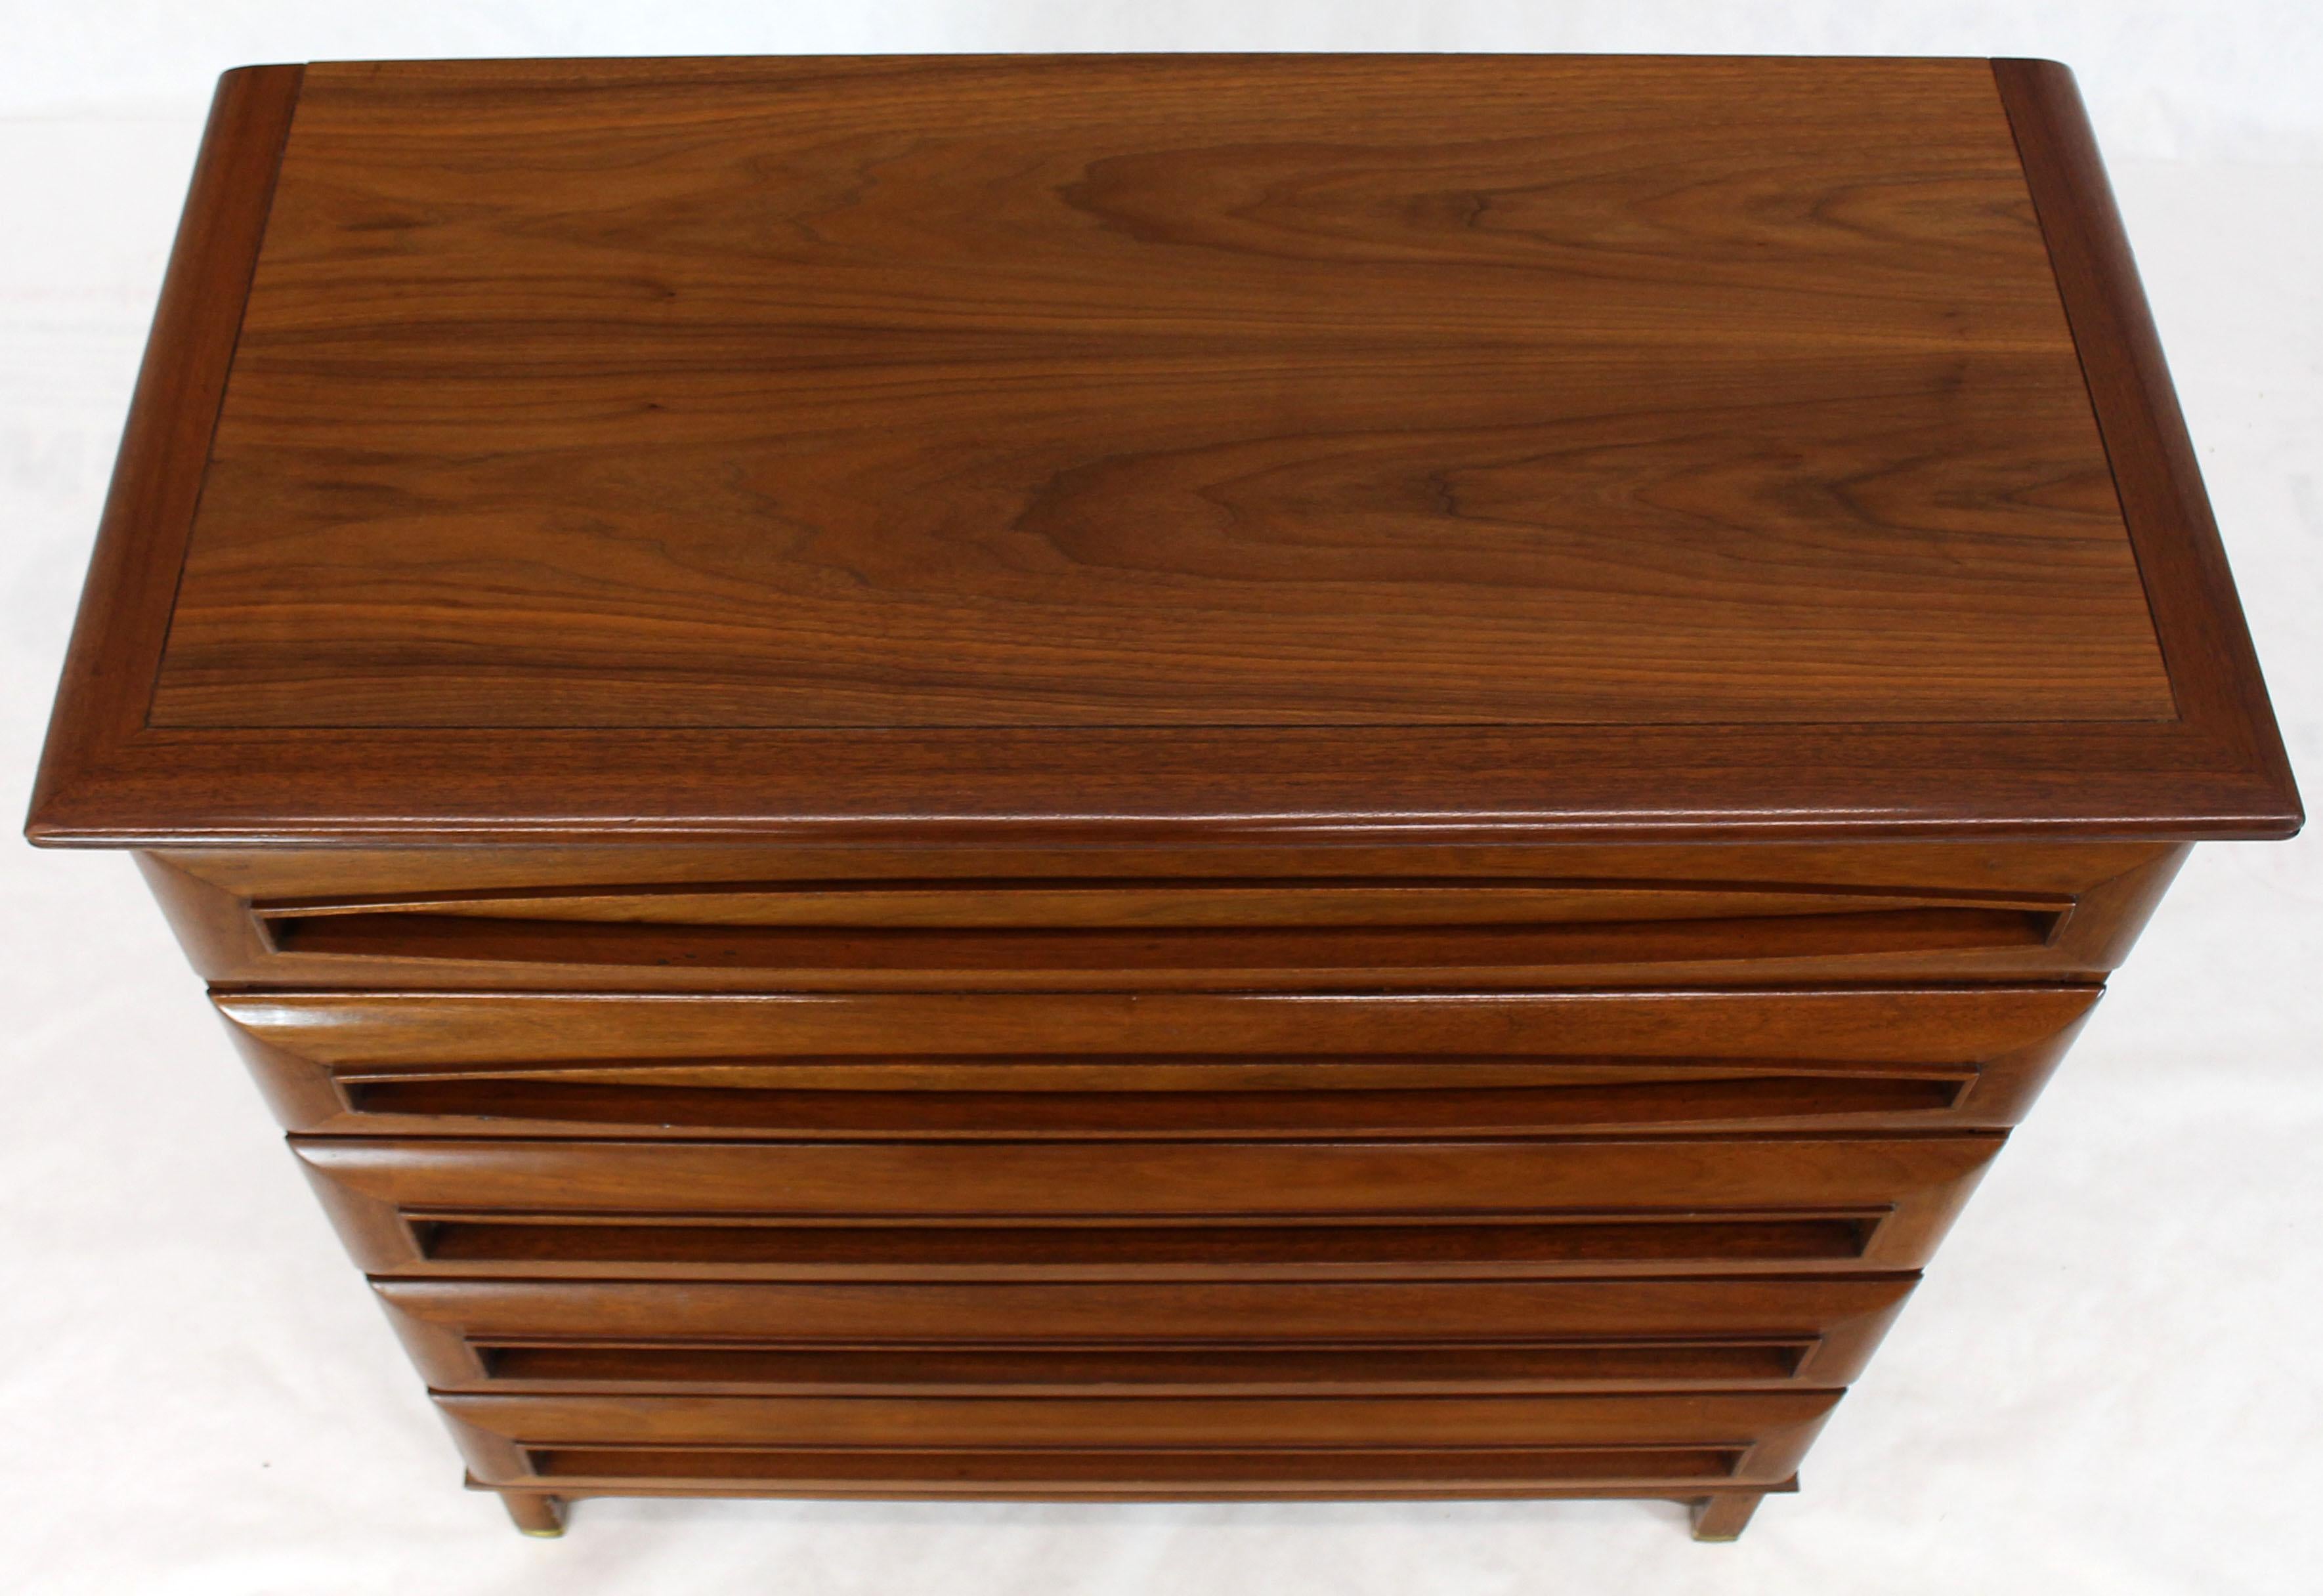 20th Century Sculptural Thick Carved Solid Walnut Panels Design 5-Drawer High Chest Dresser For Sale